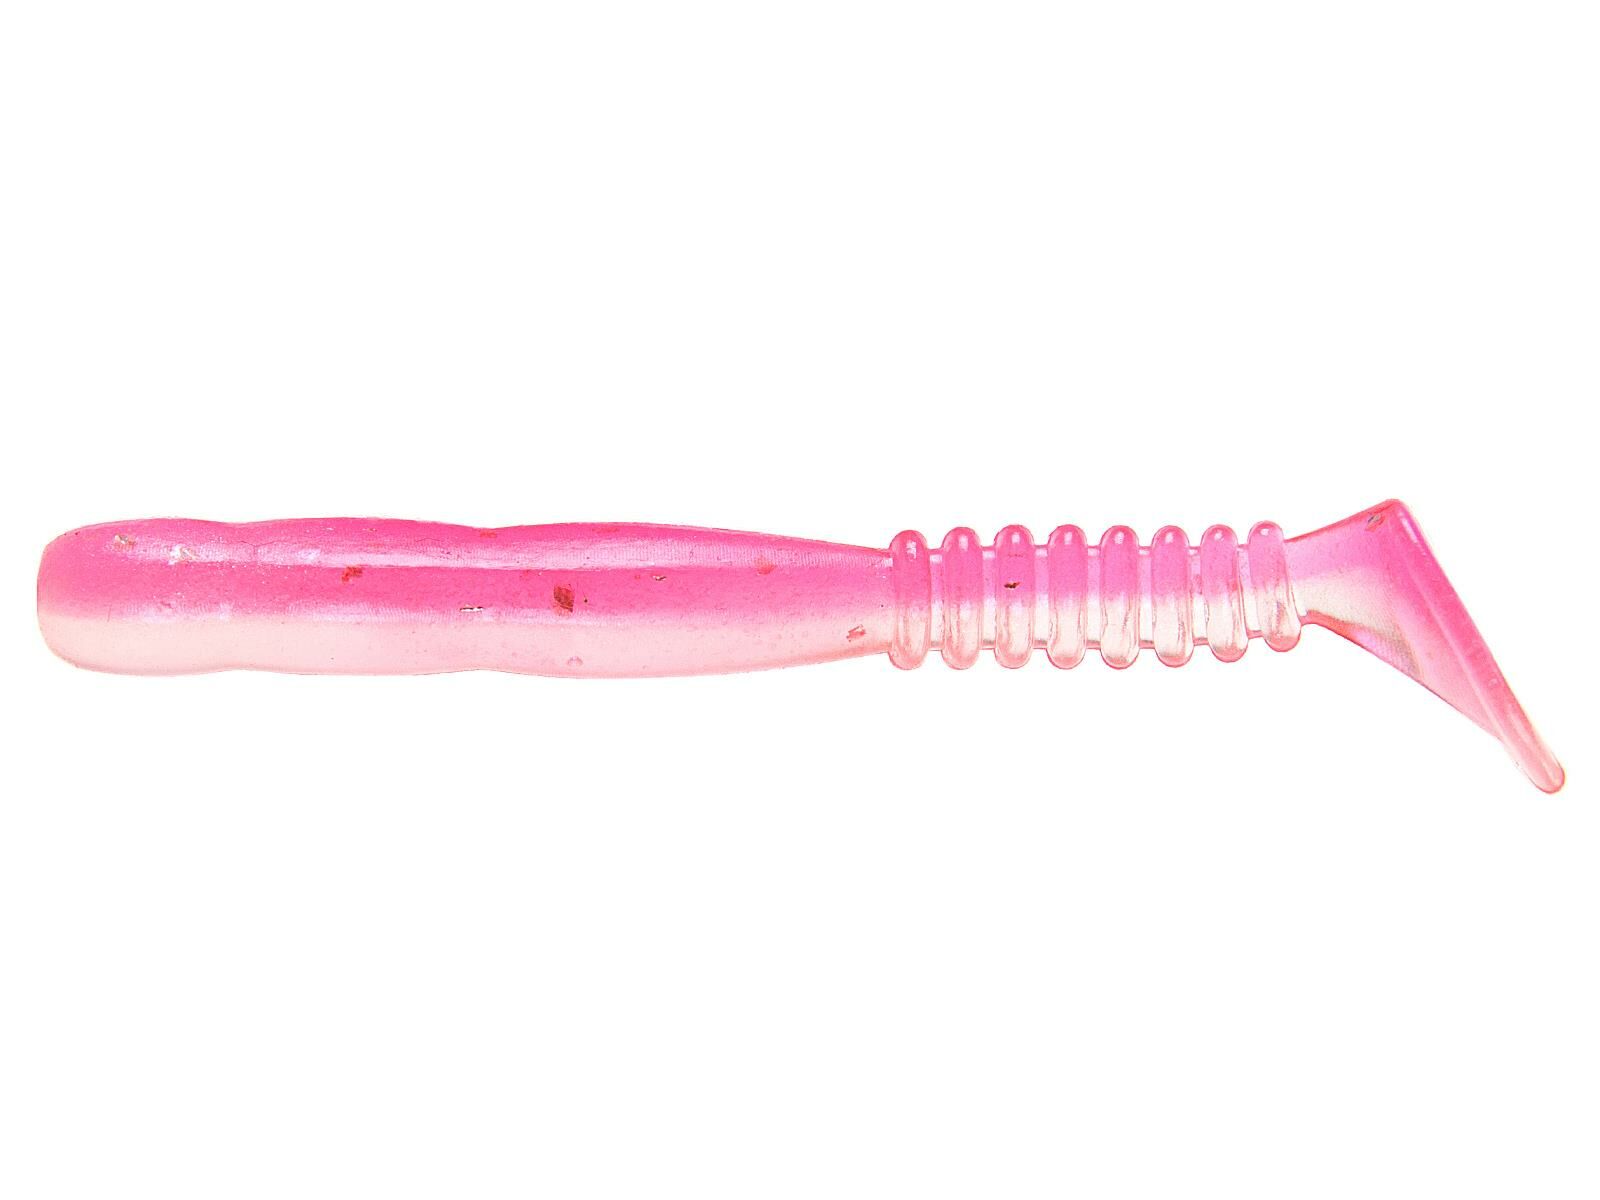 3" Rockvibe Shad - Clear Pink